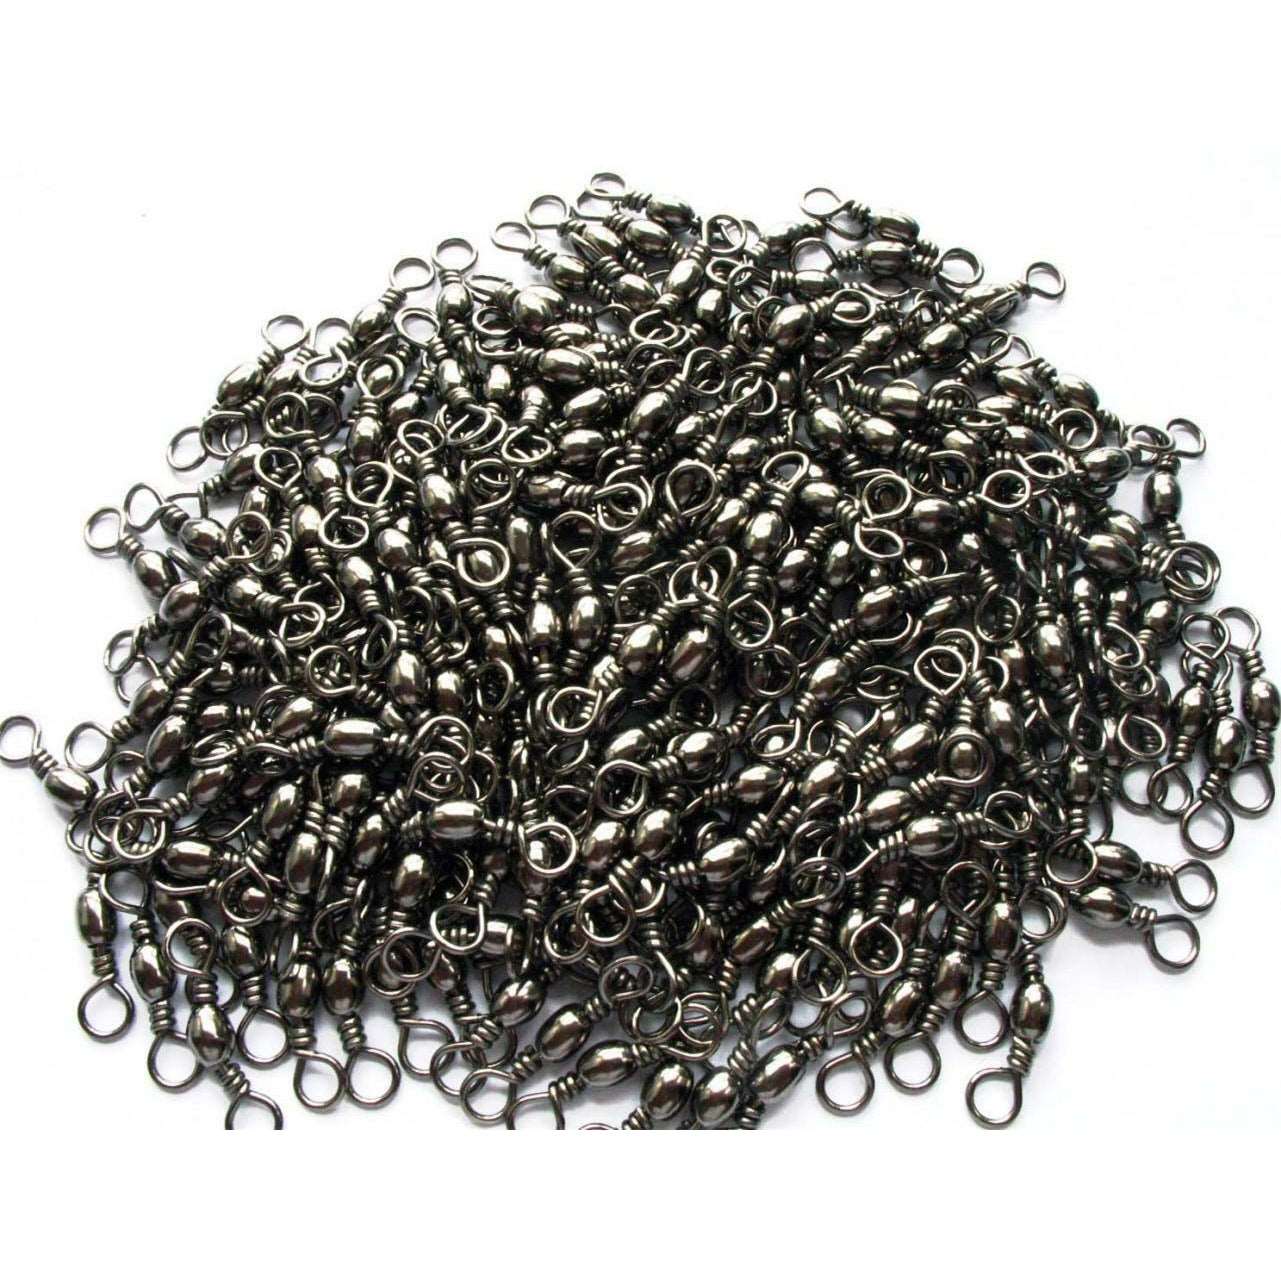 60 x Chemically Sharpened SS Octopus Hooks in 3 Sizes Fishing